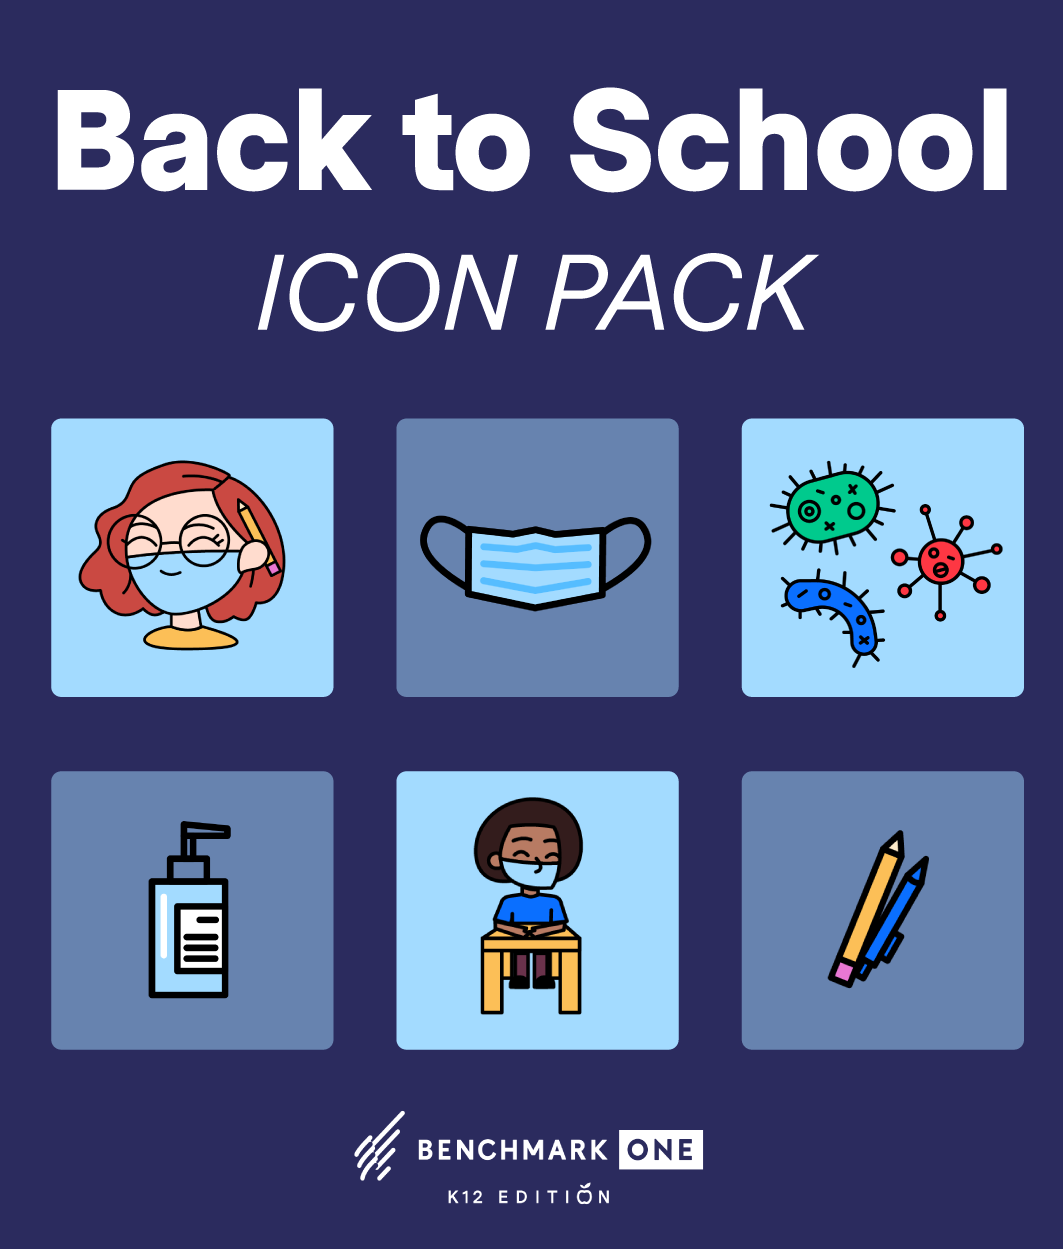 Images-for-Back-to-School-Icon-Pack_3